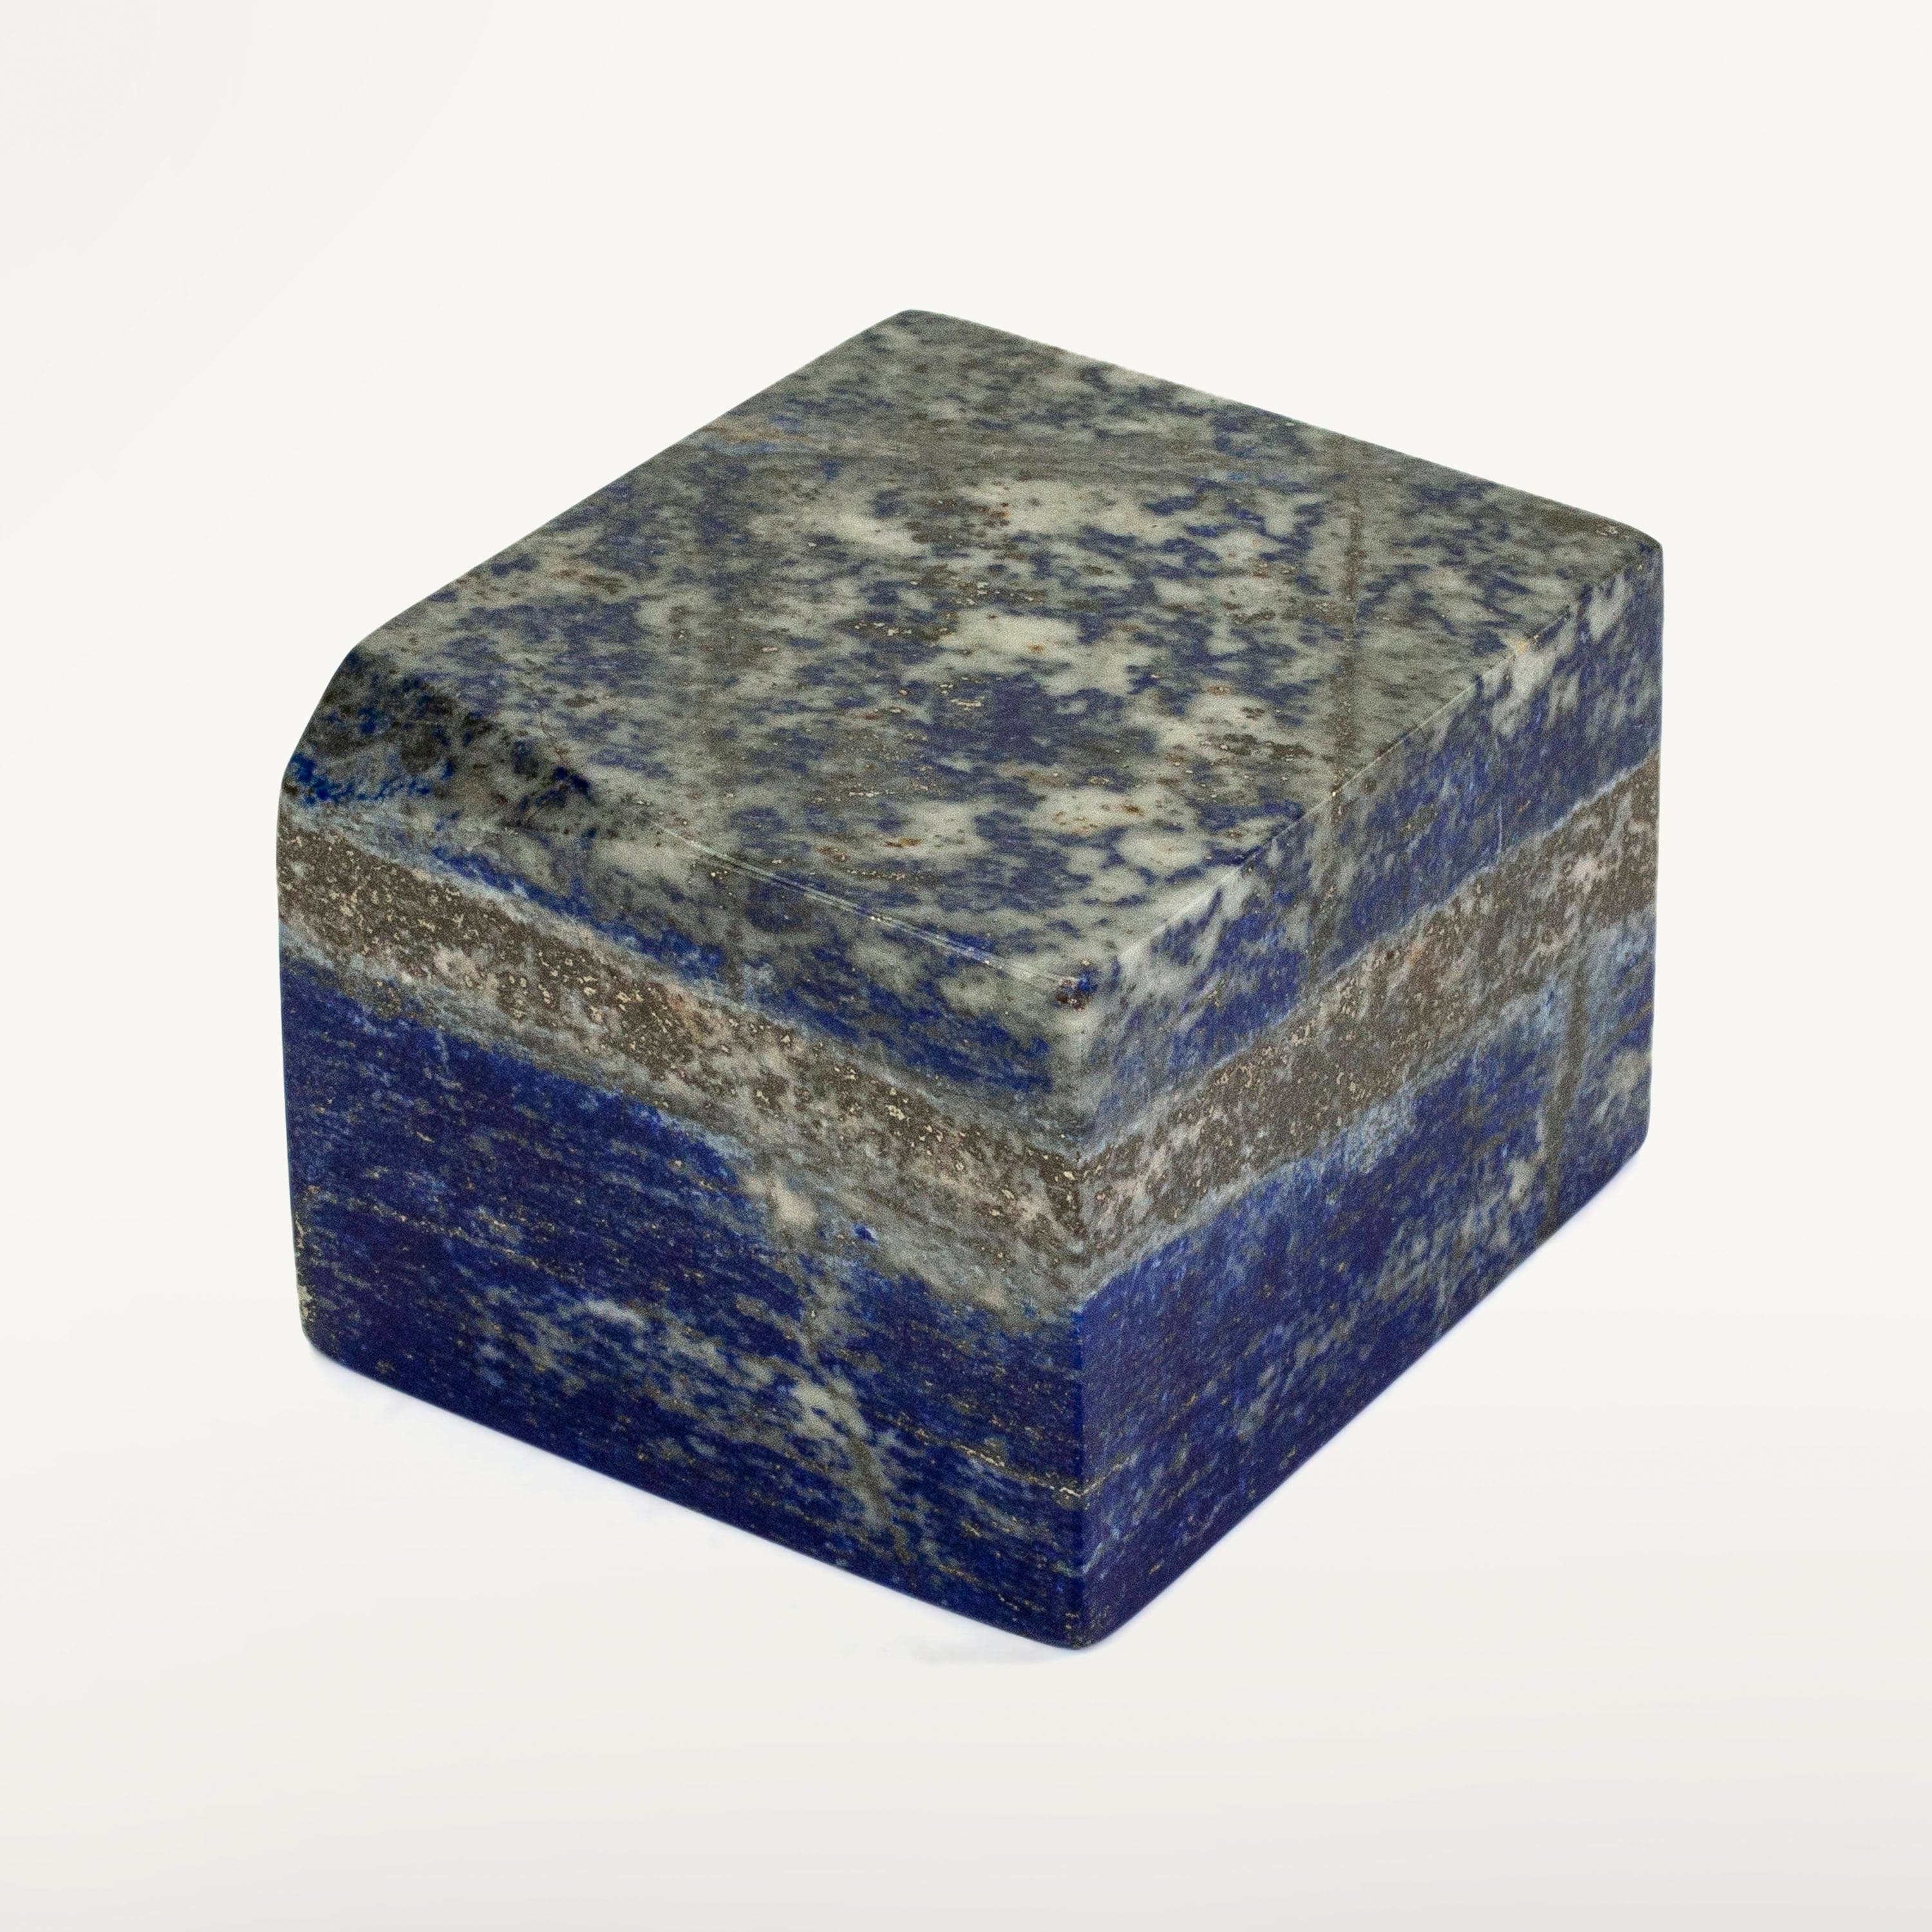 Kalifano Lapis Lapis Lazuil Cube from Afghanistan - 655 g / 1.4 lbs LP700.006